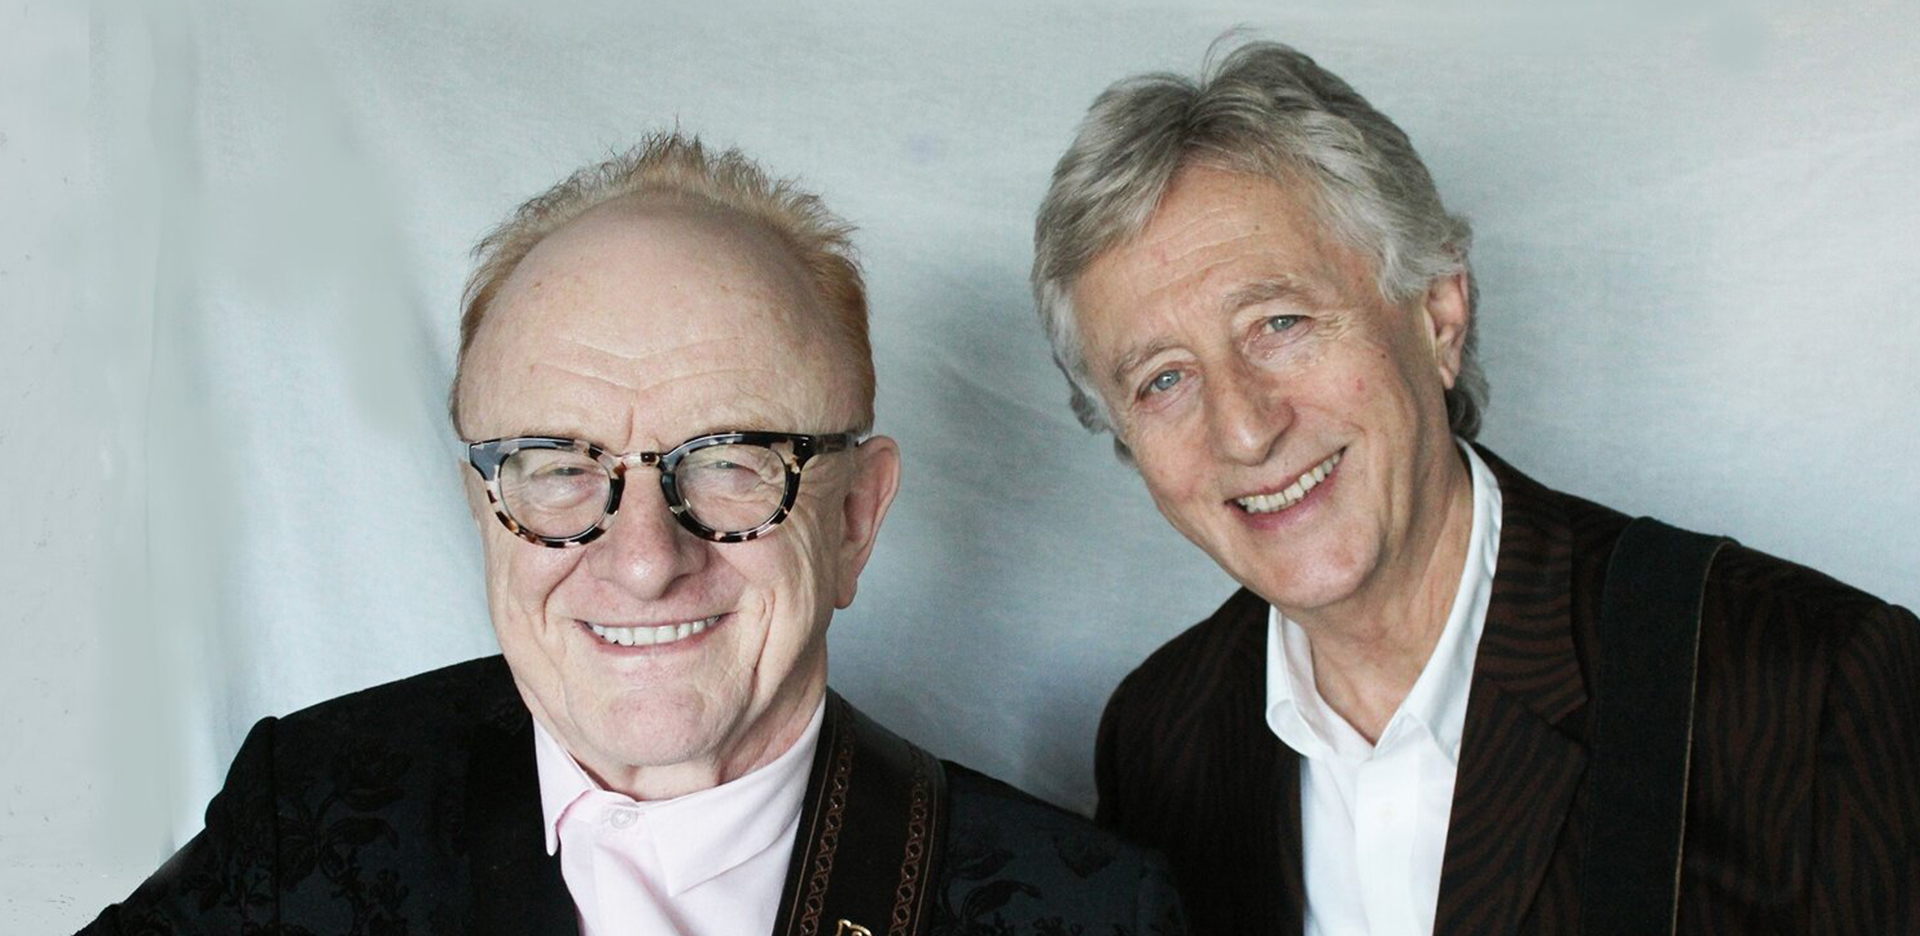 Peter Asher and Jeremy Clyde image